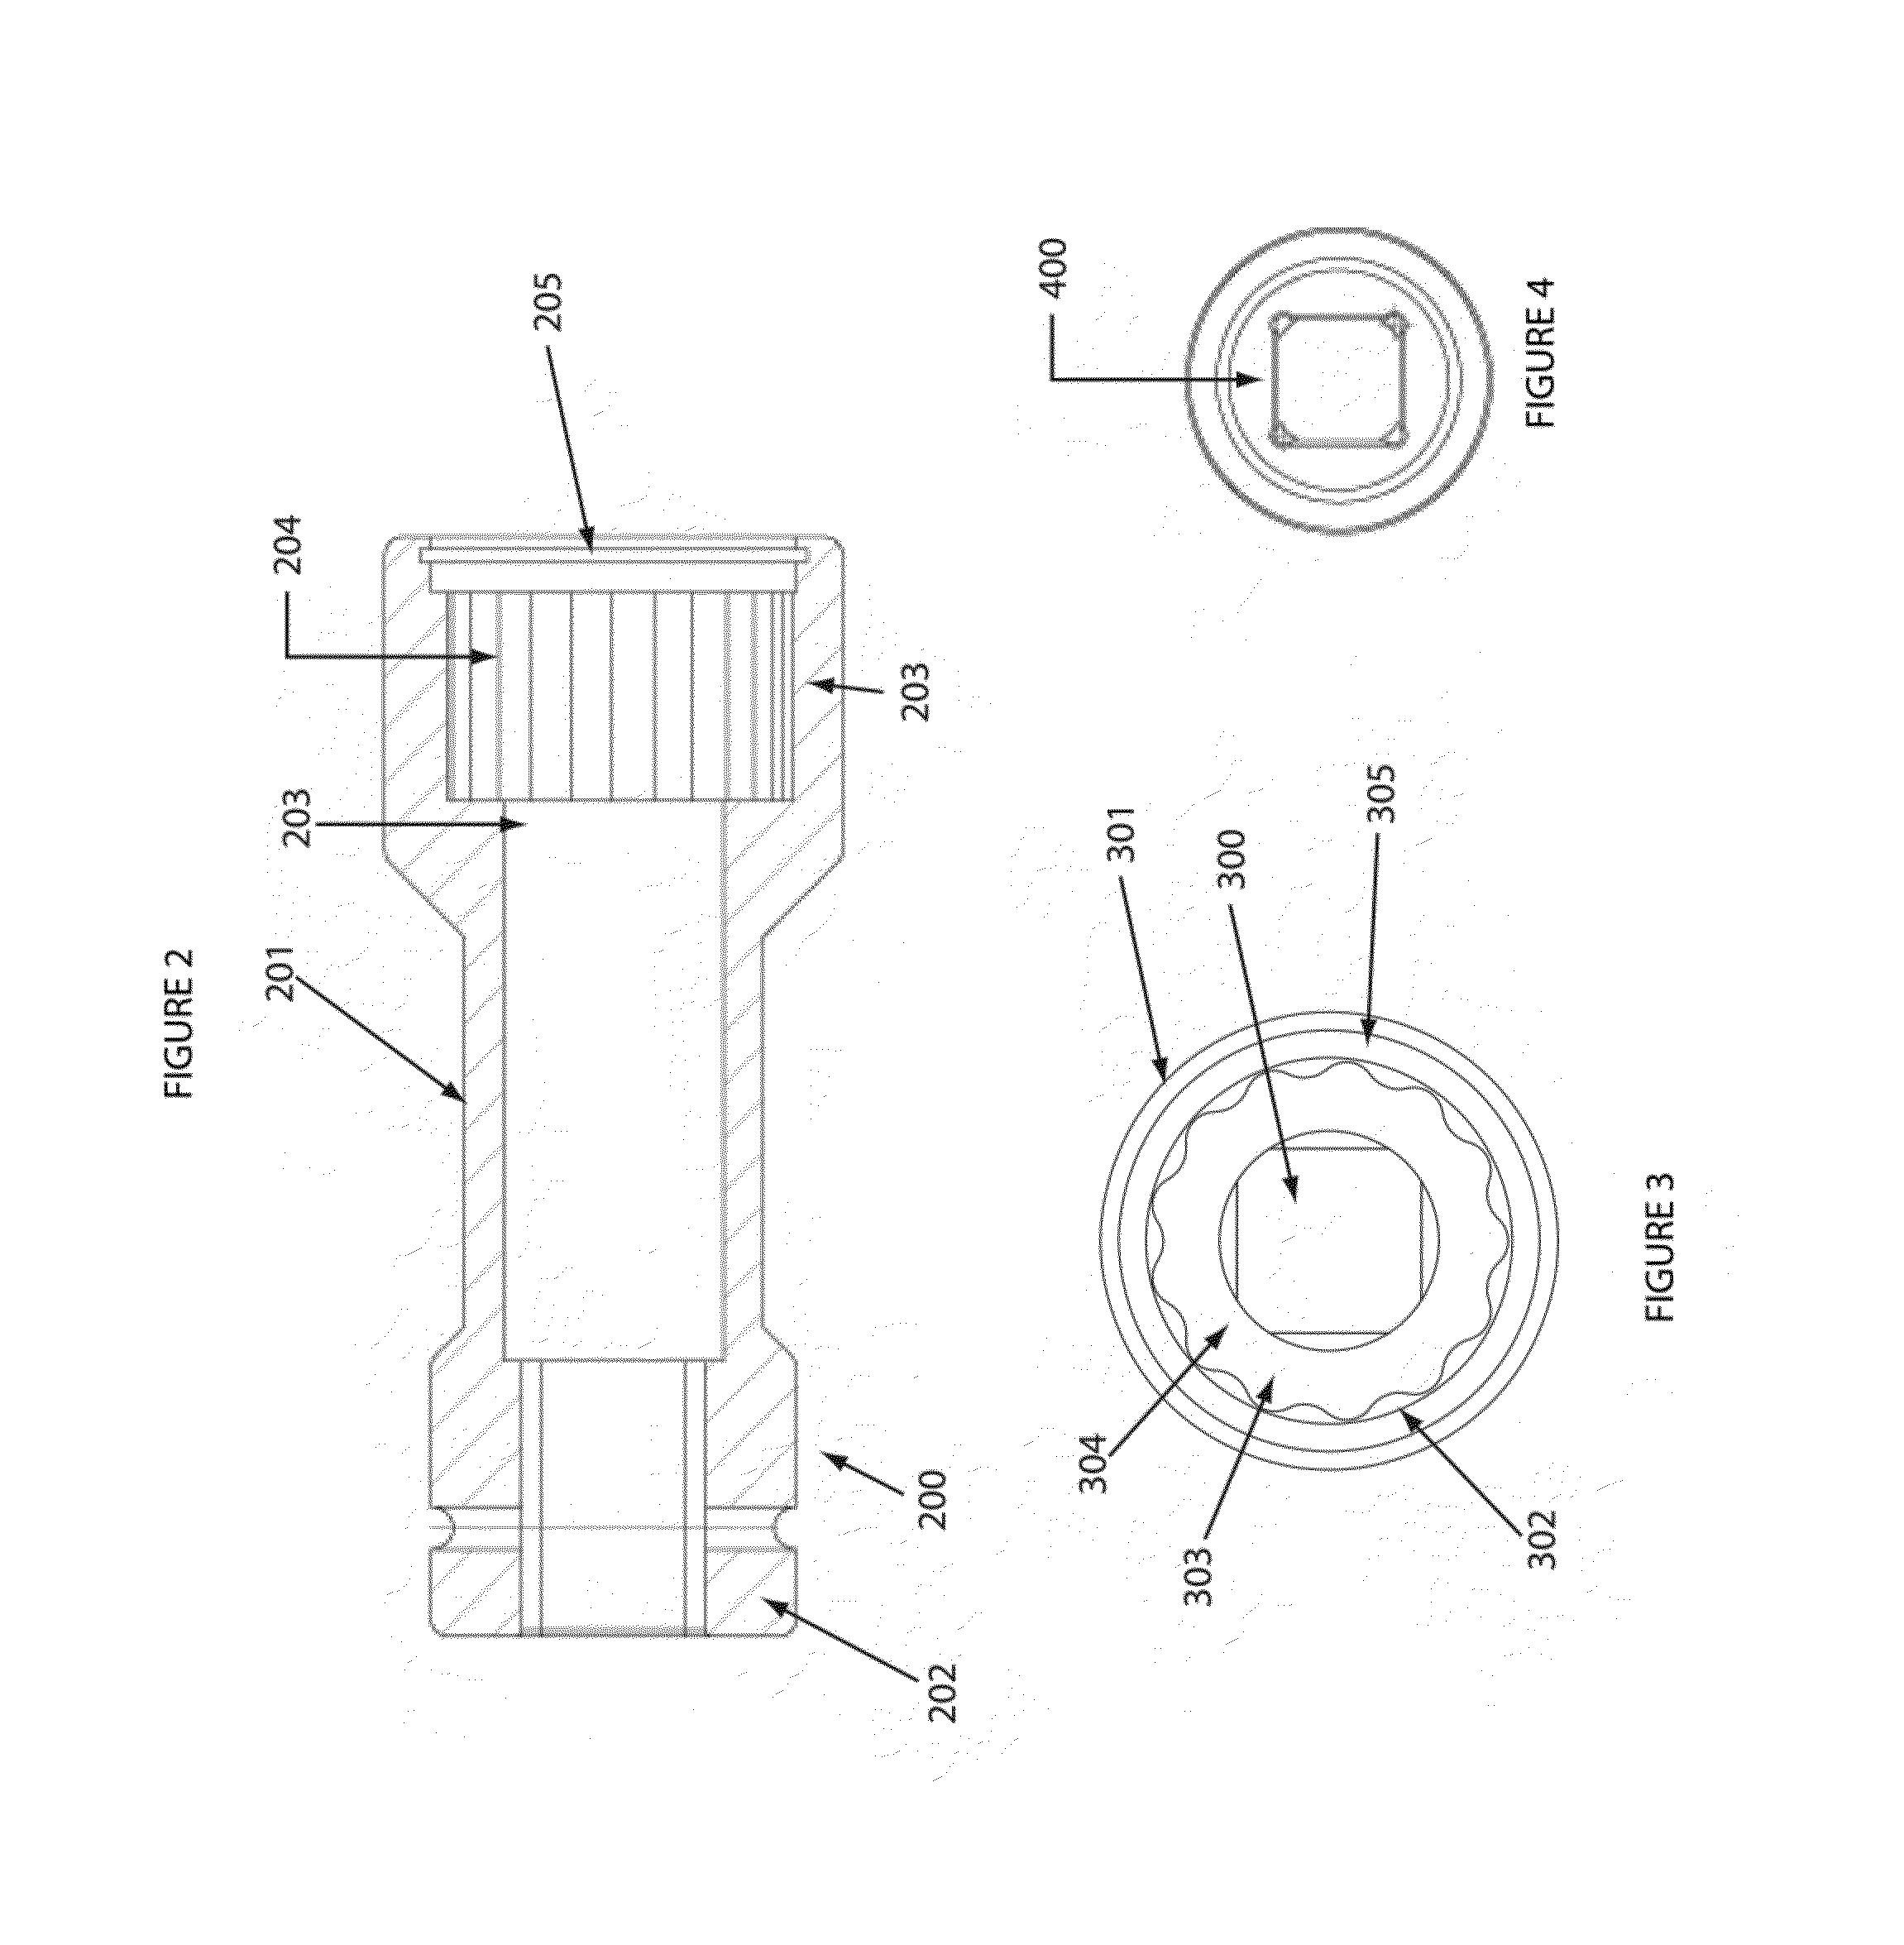 Stud Installation and Removal Tool and Method of Use